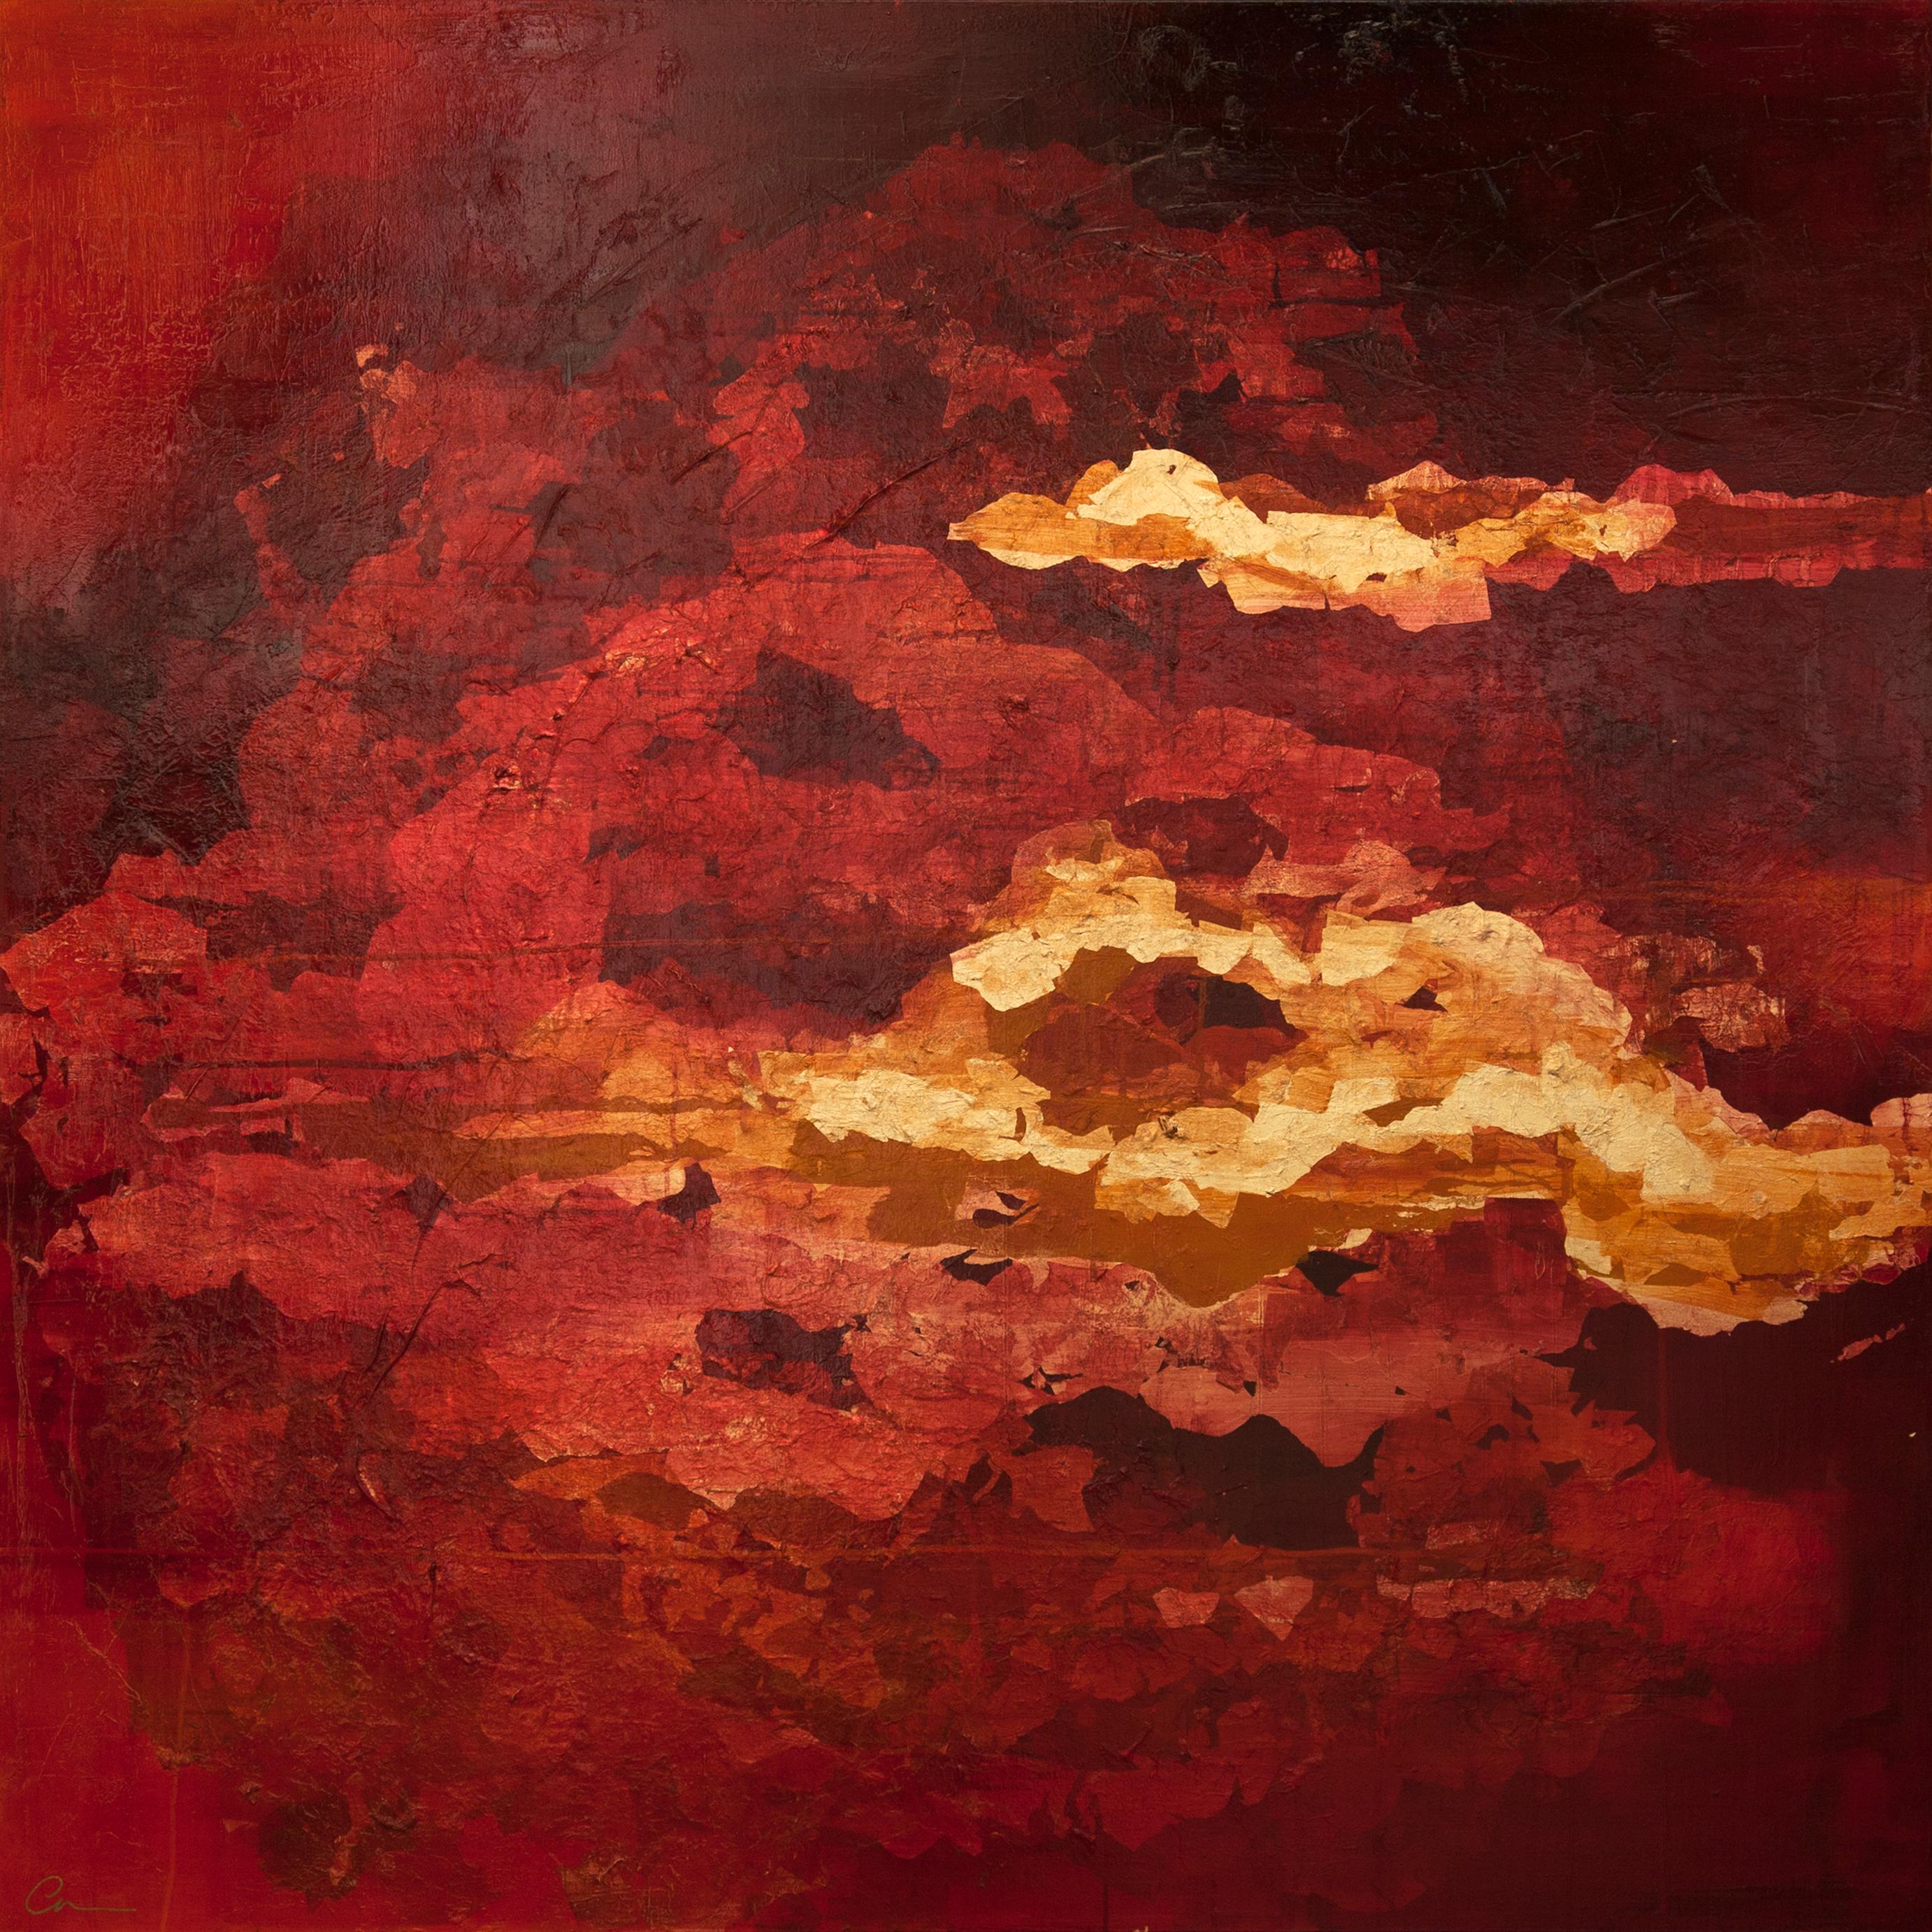 Chelsea Davine Abstract Painting - Into the Heart with Gold - 21st Century, Contemporary, Oil Painting, Gold Leaf